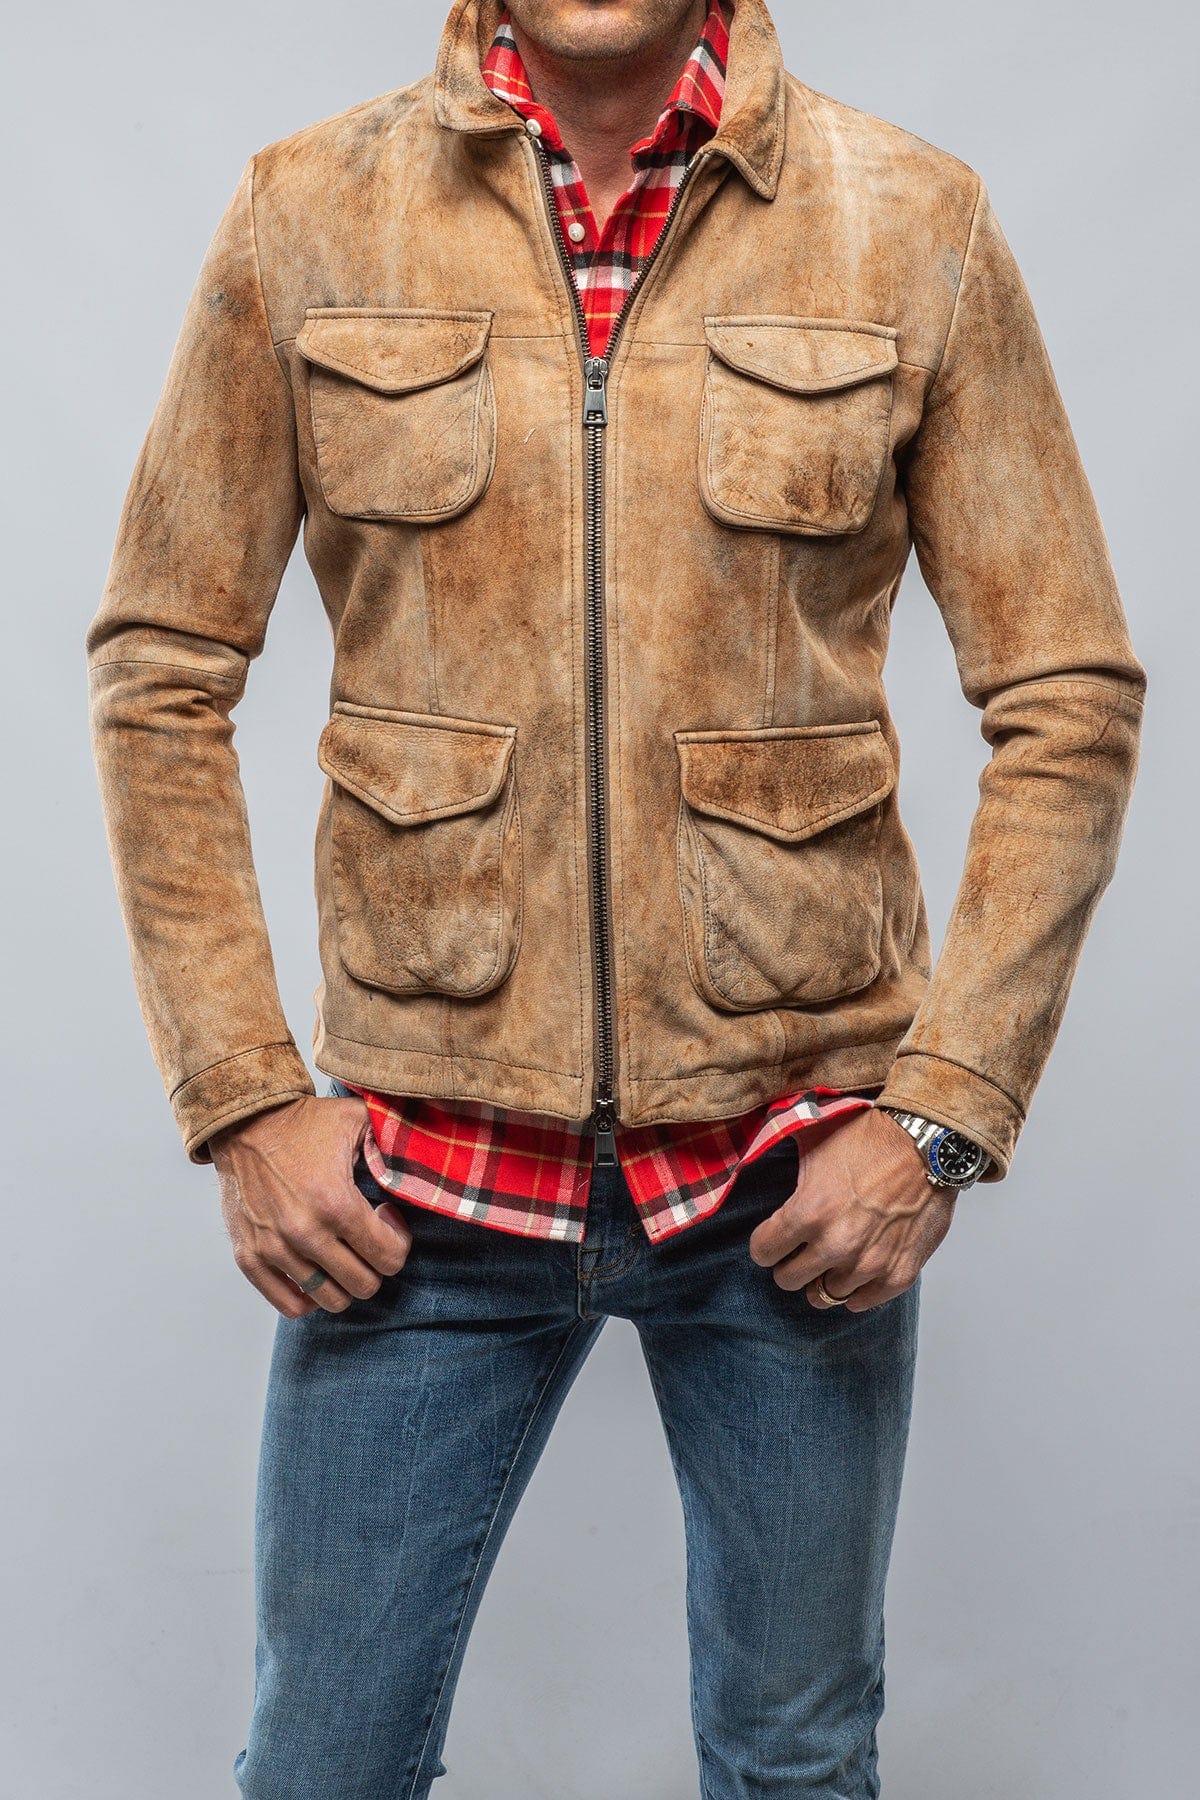 Men's Leather & Suede Jackets | Axel's | 2